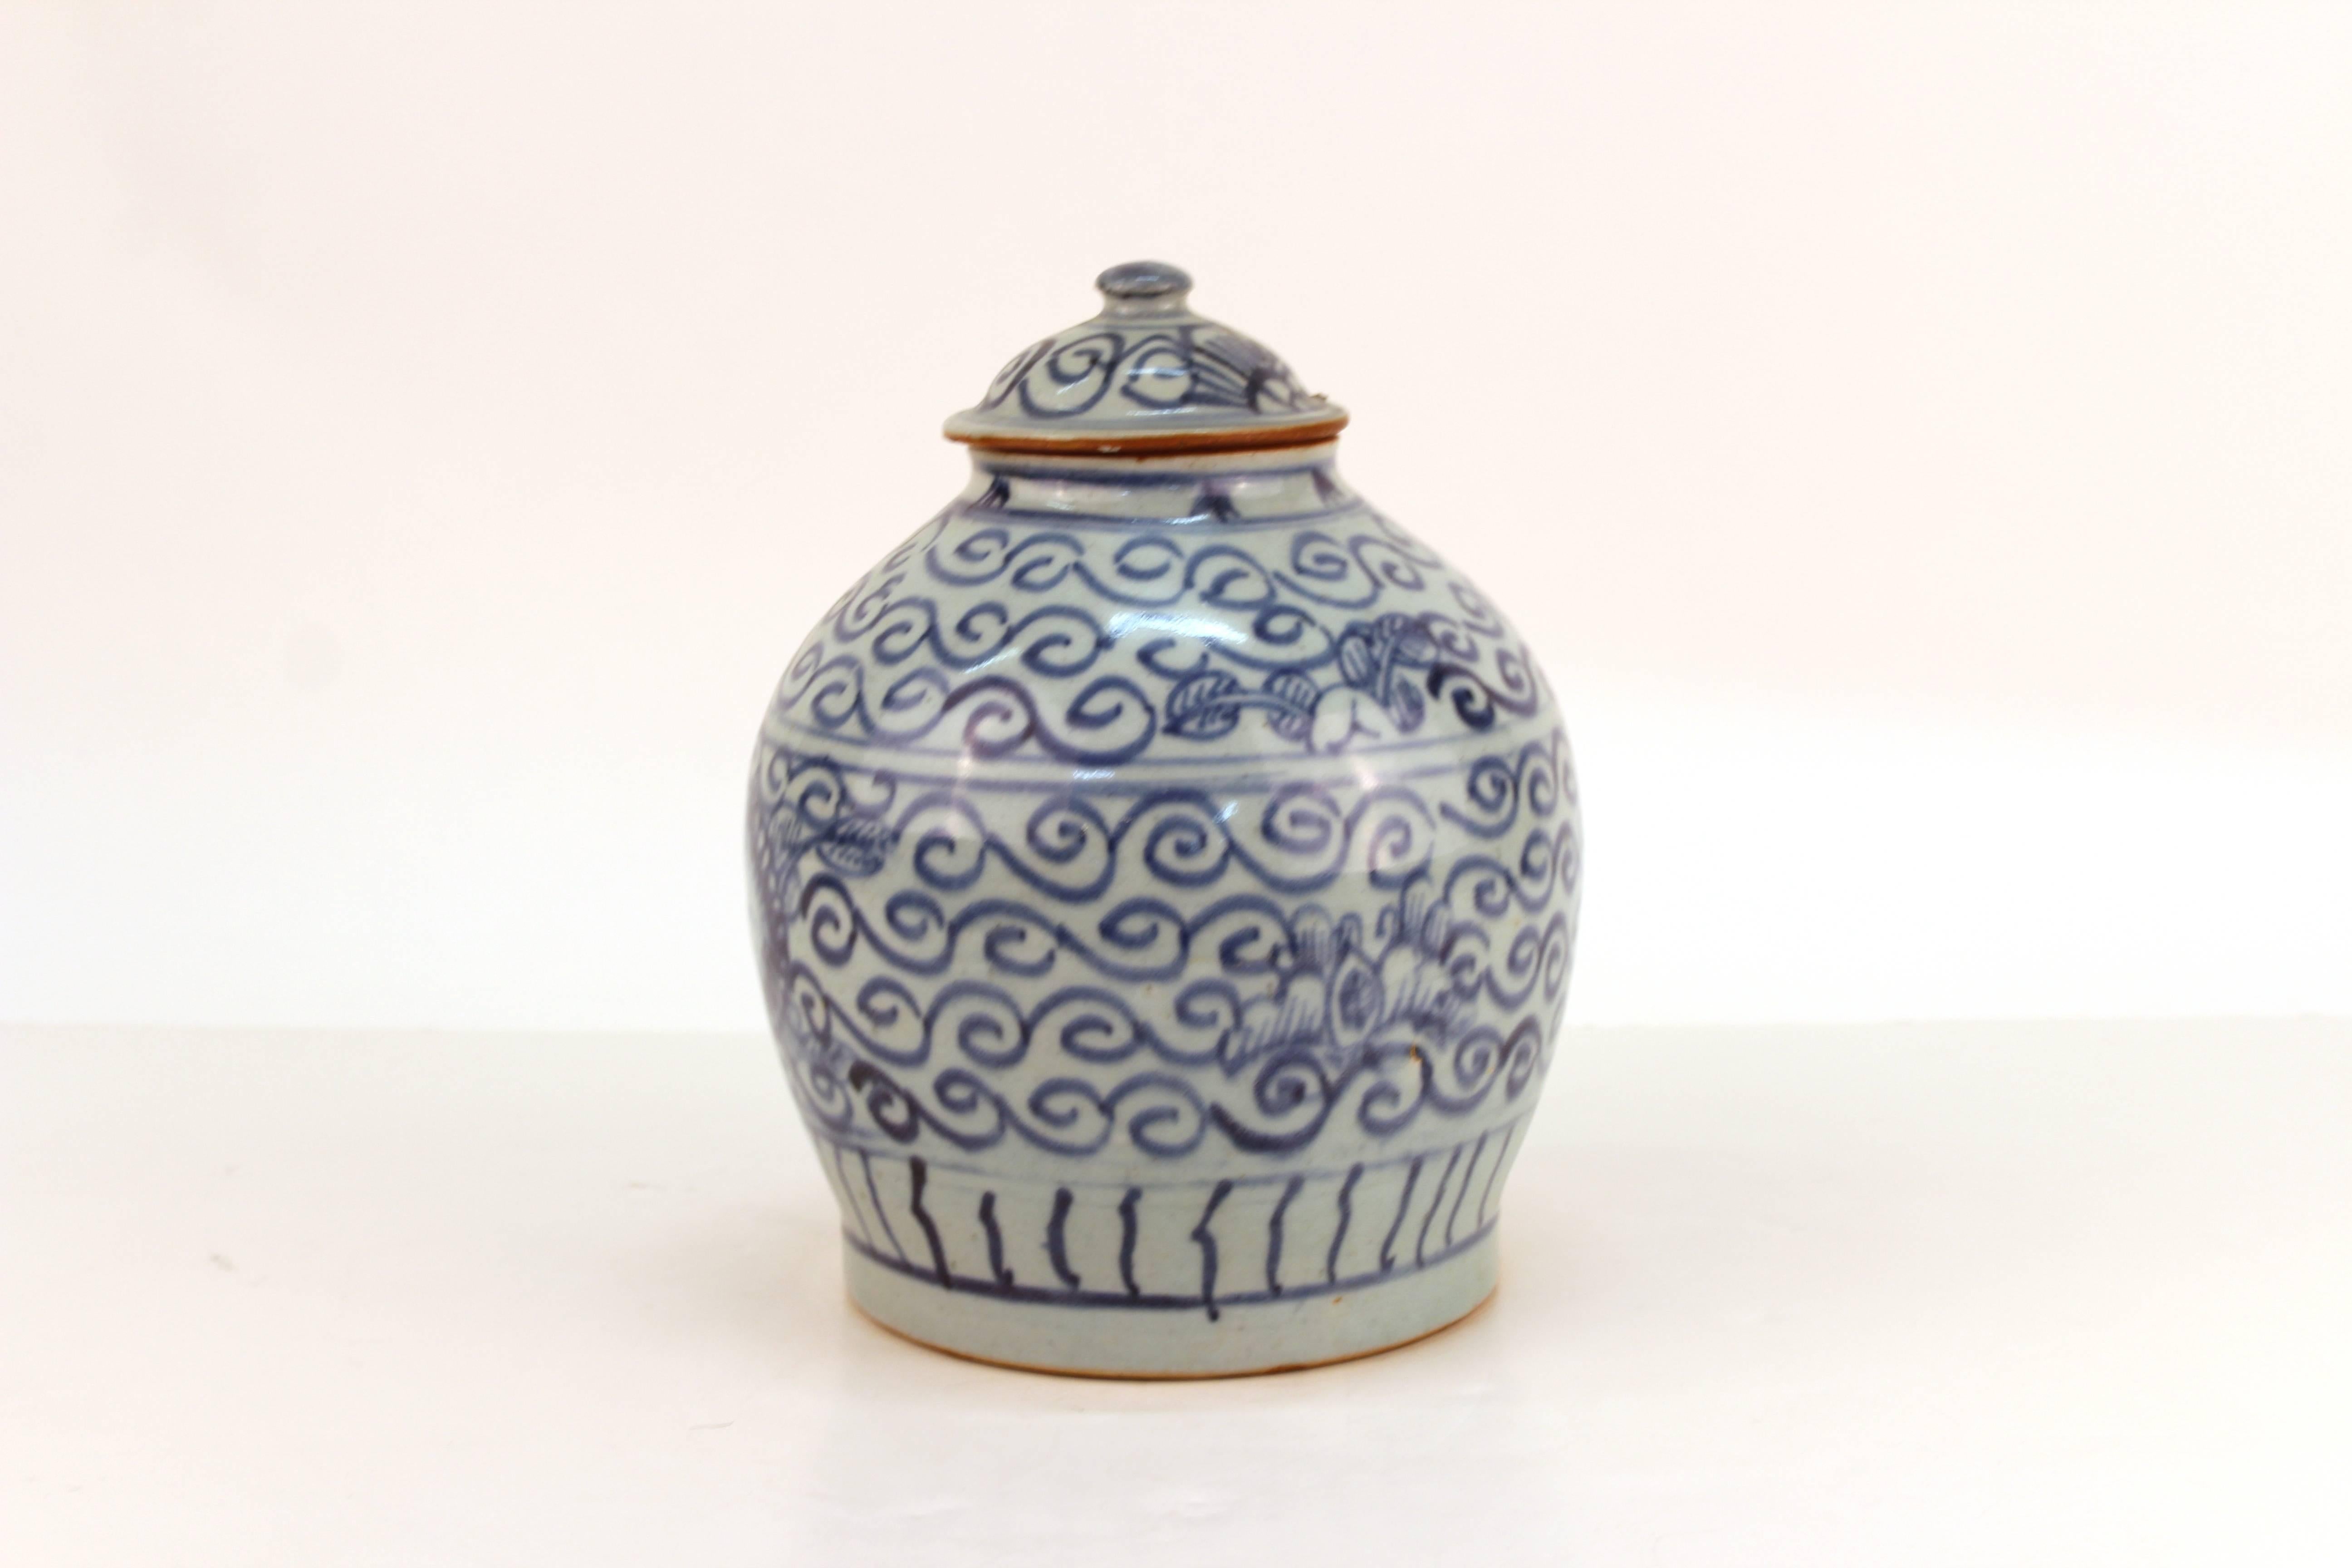 Chinese produced jar crafted for the Persian market. White glazed ceramic with swirling patterns and floral decoration in blue. Includes a matching lid. Some dimples or small spots in glaze due to production process. Wear appropriate to age and use.